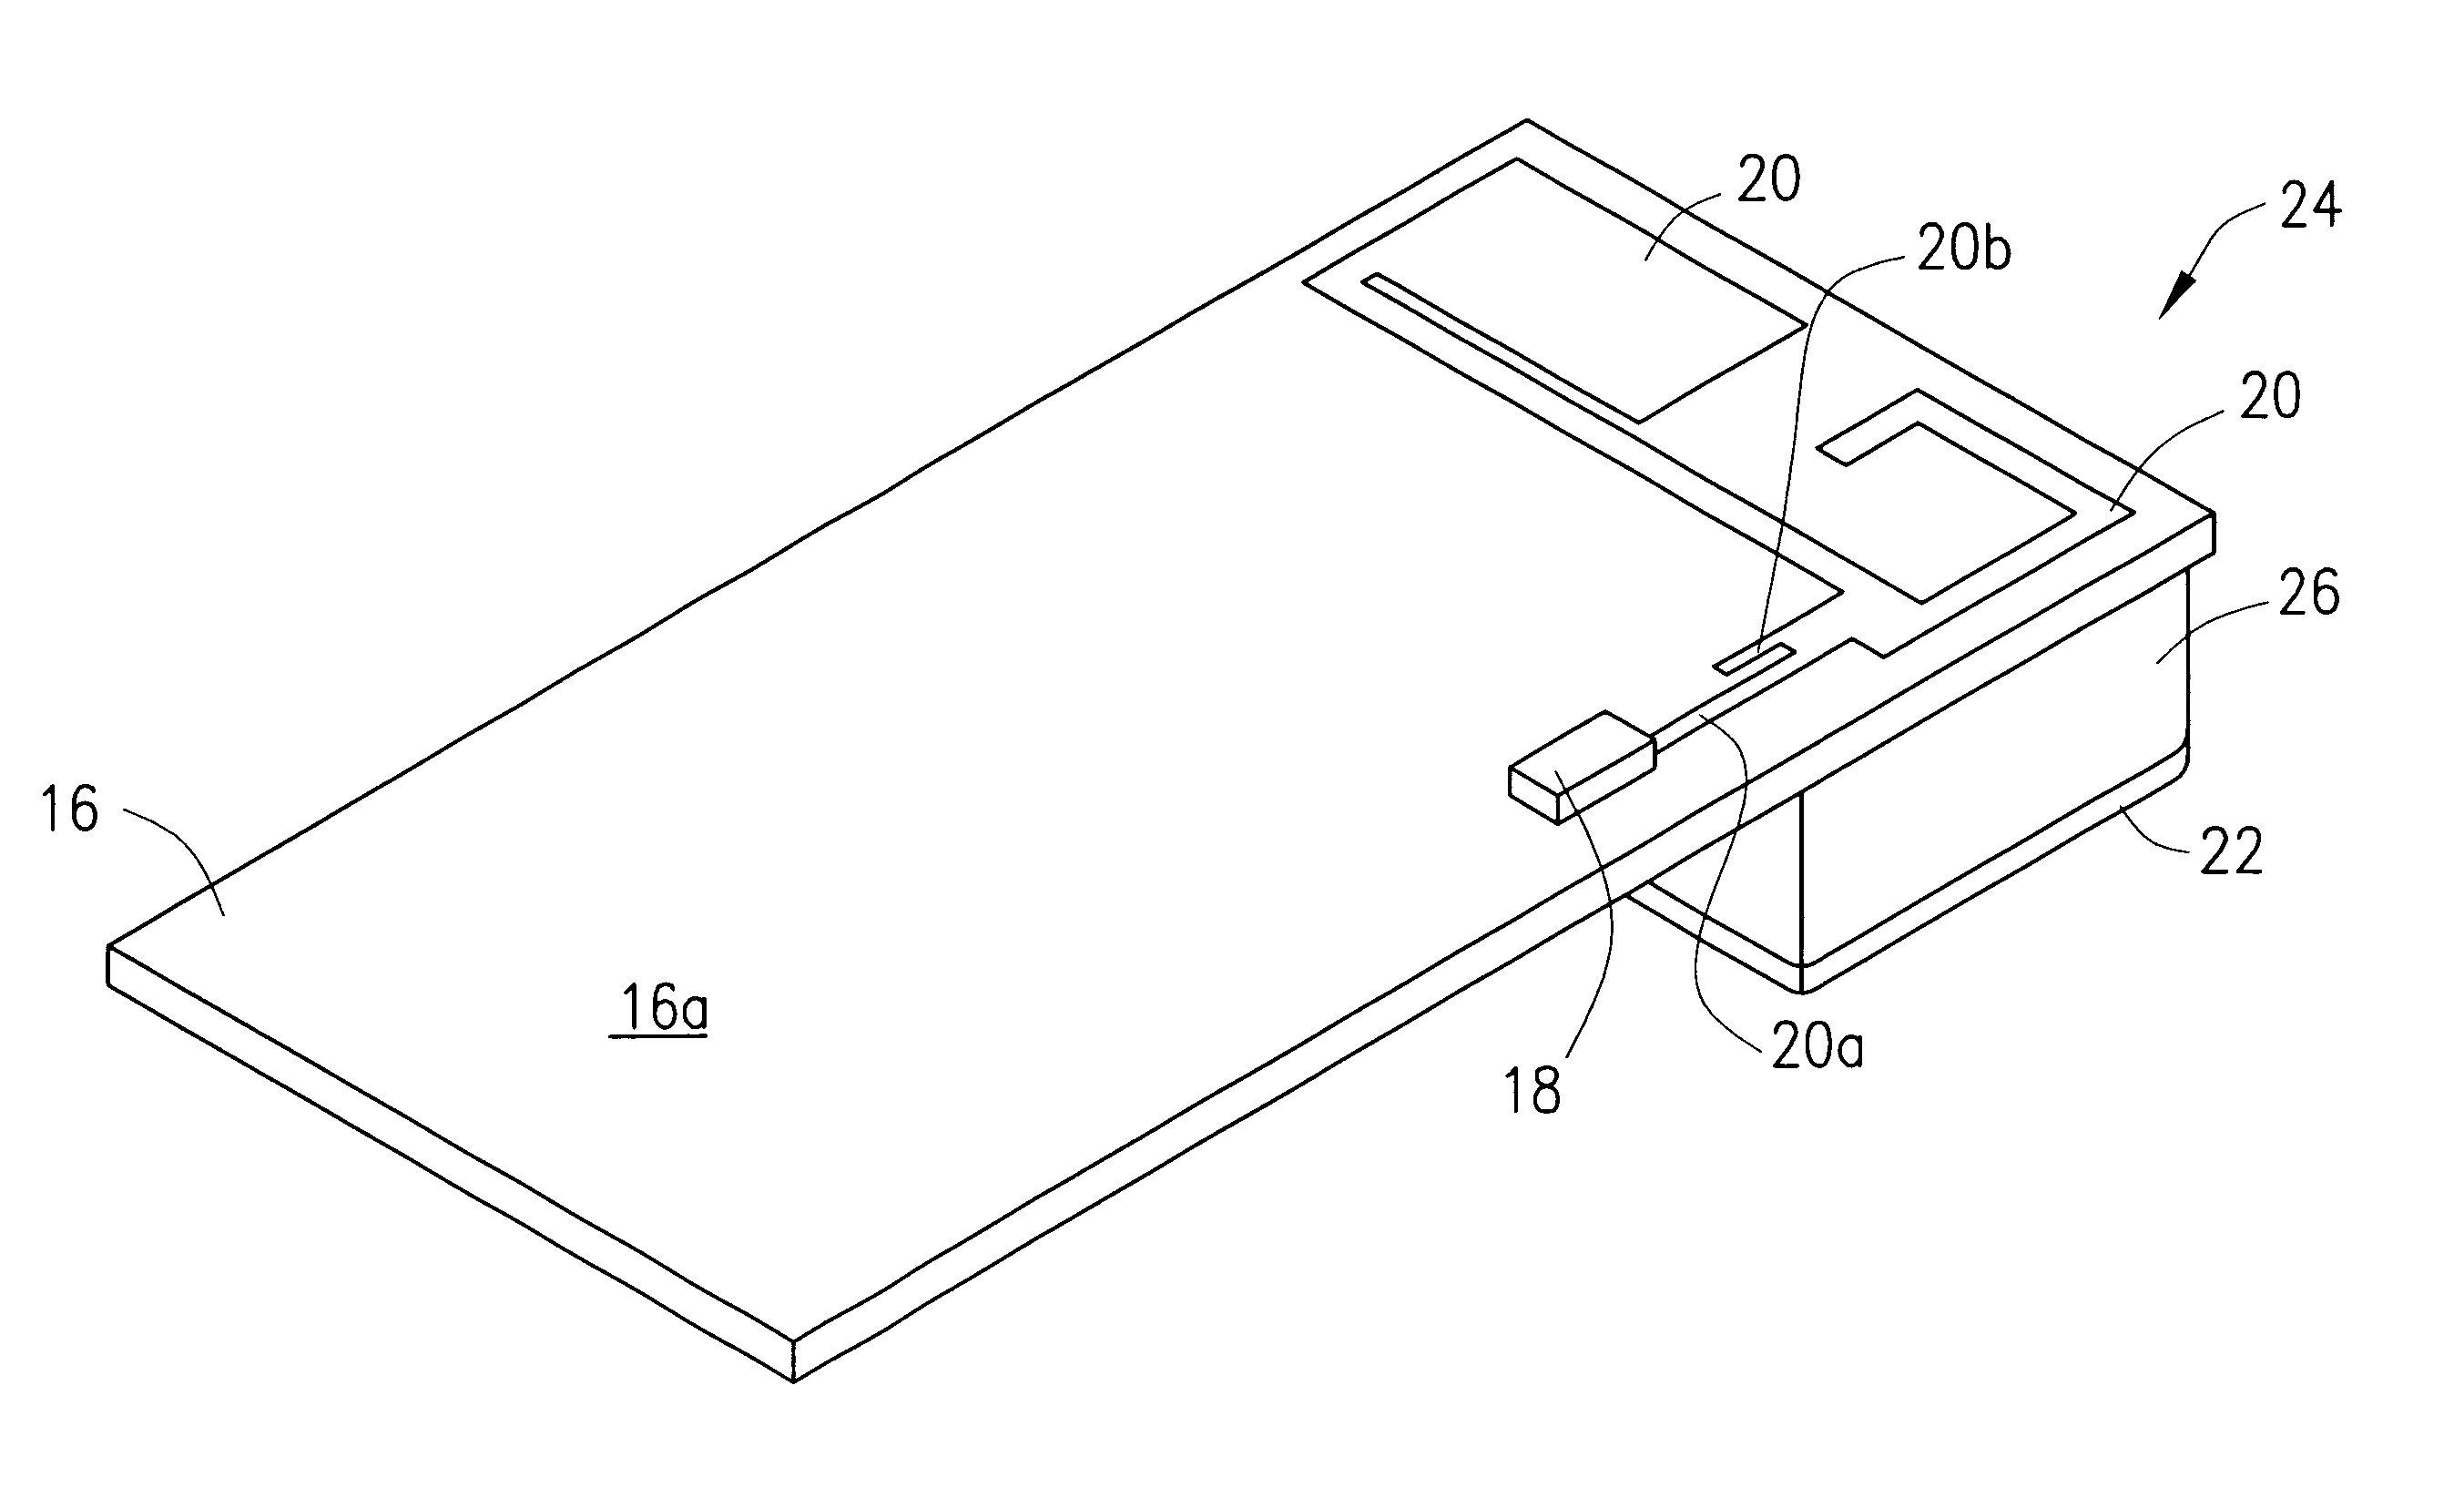 In-built antenna for mobile communication device